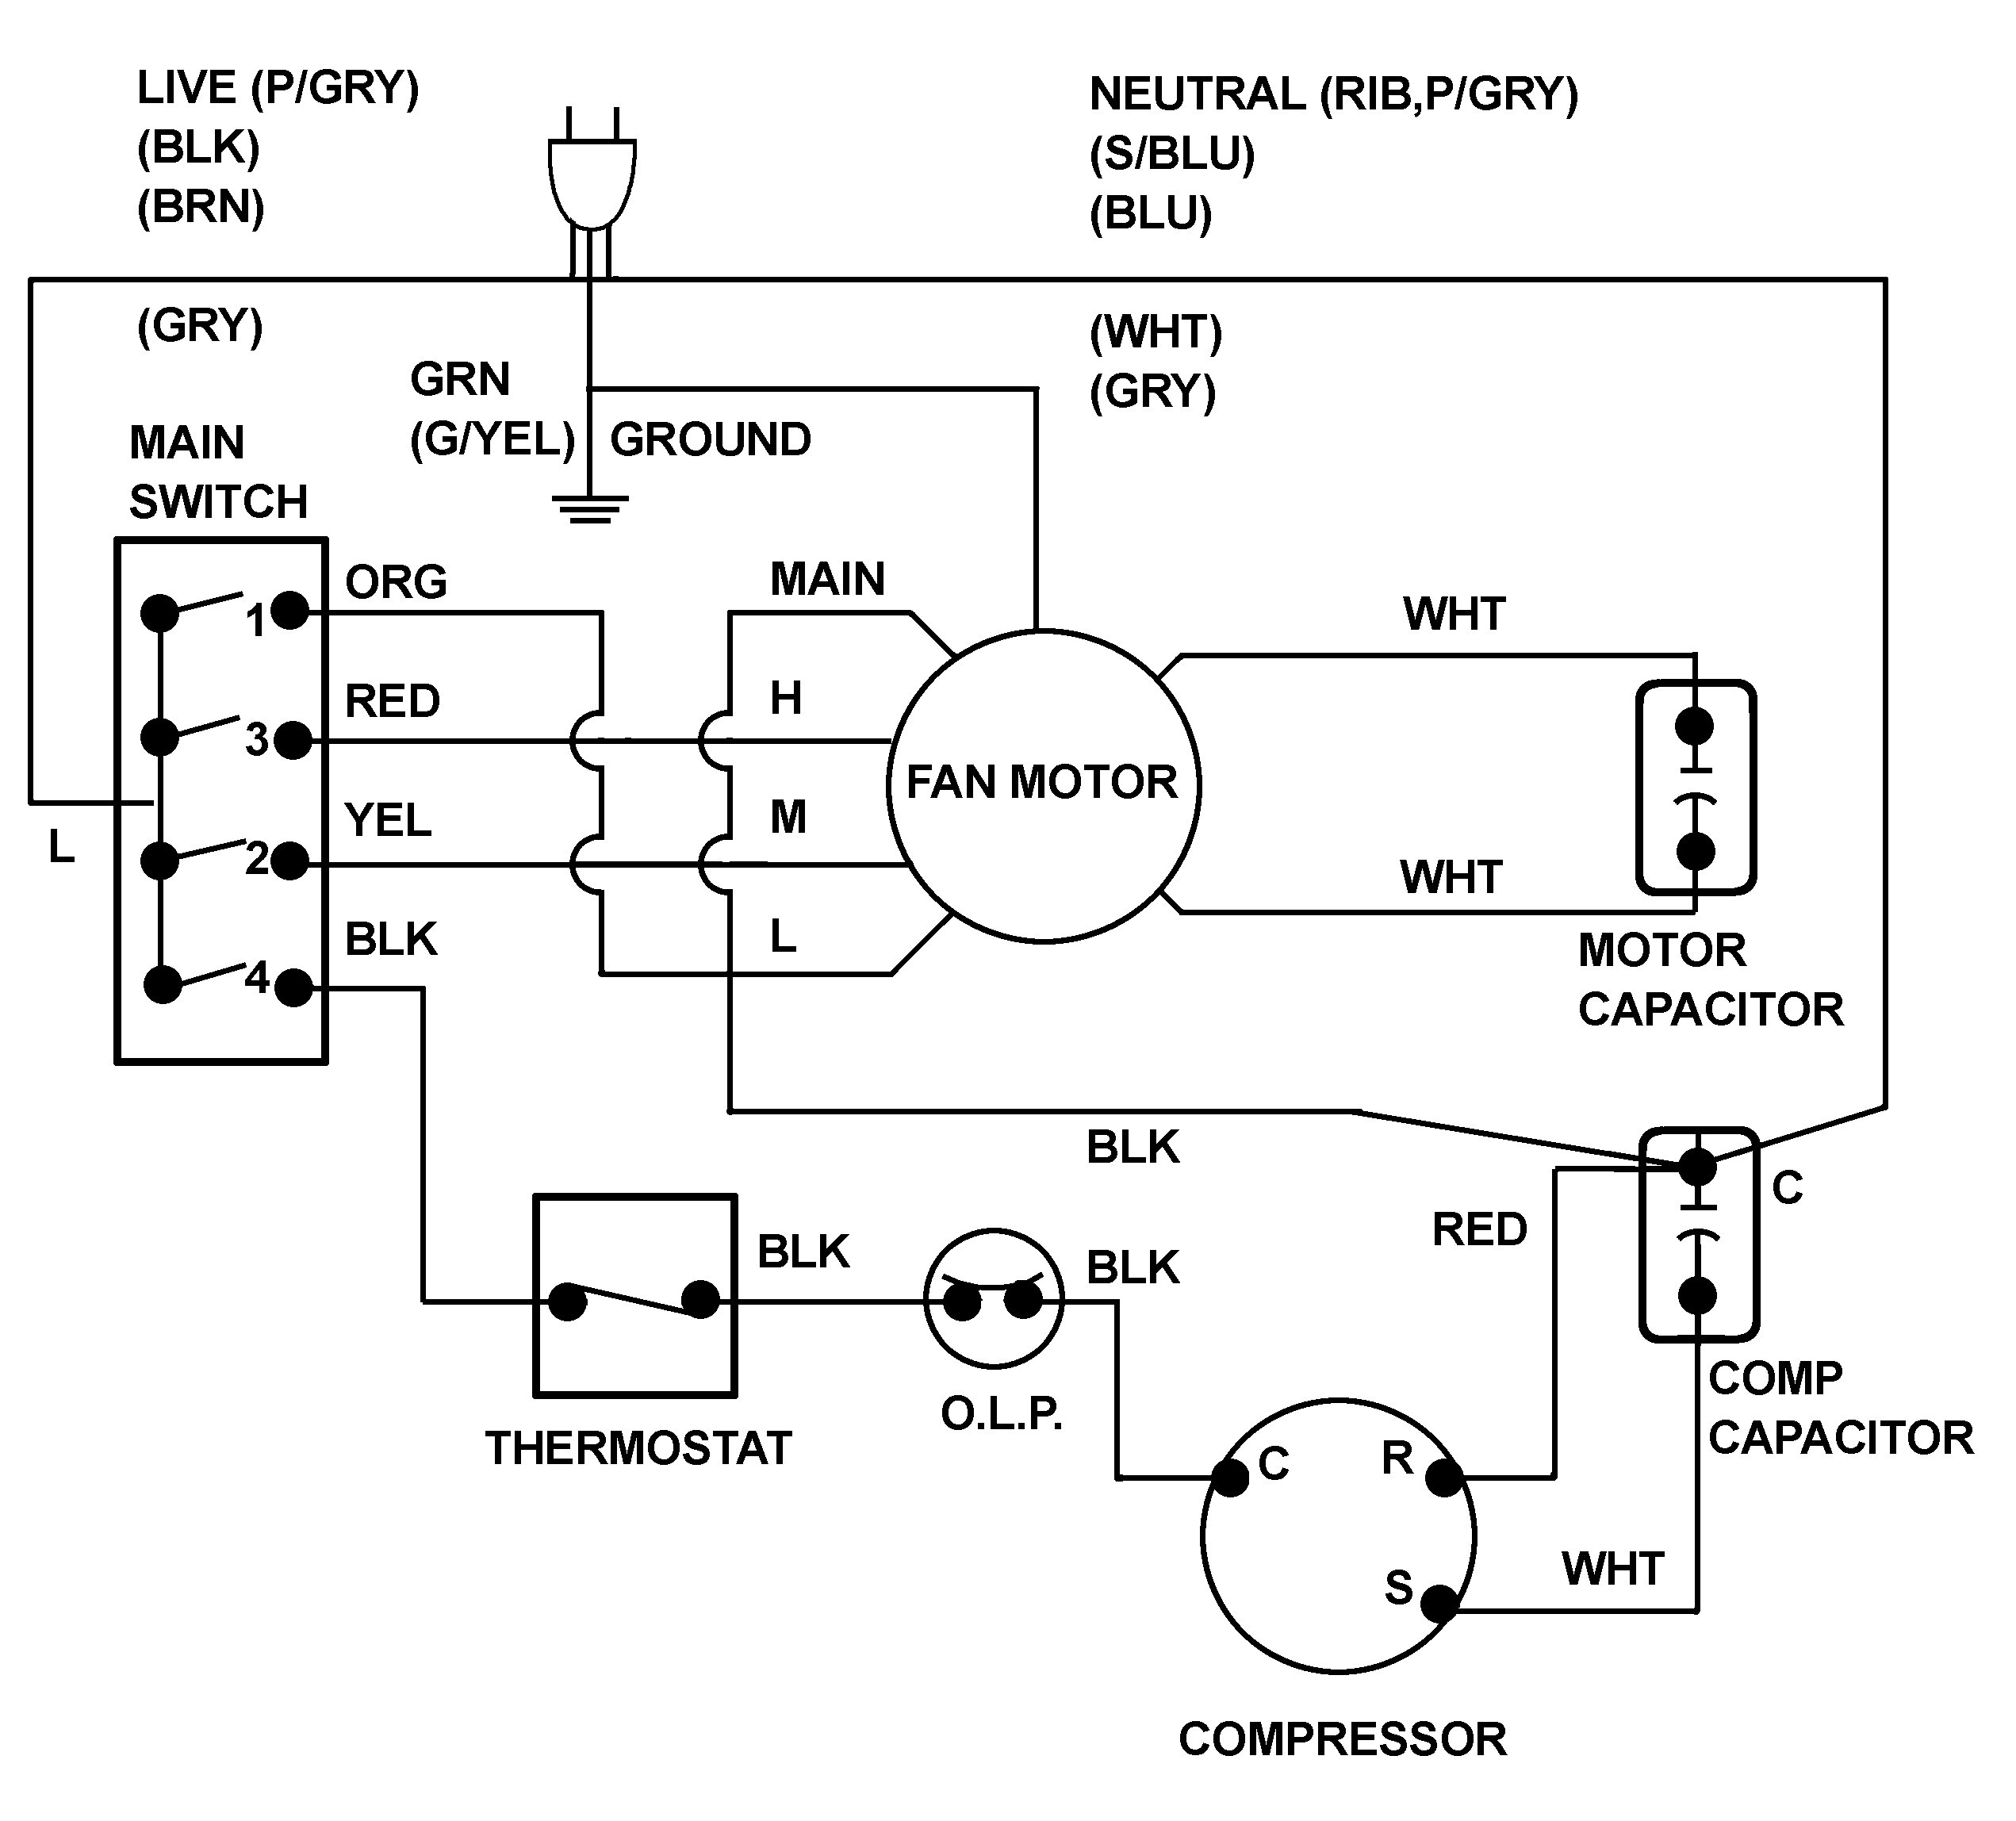 Car Air Conditioning System Wiring Diagram Elegant Air Conditioner Wiring Diagram Pdf Diagram Of Car Air Conditioning System Wiring Diagram